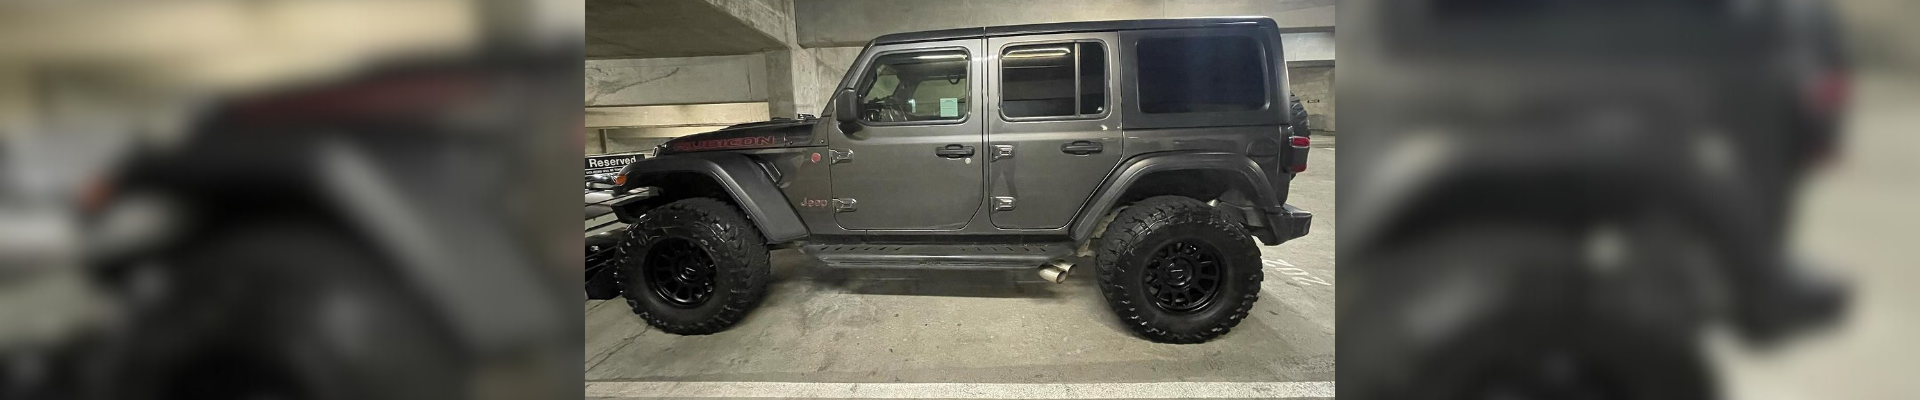 jeep-Wrangler-gallery-img.png